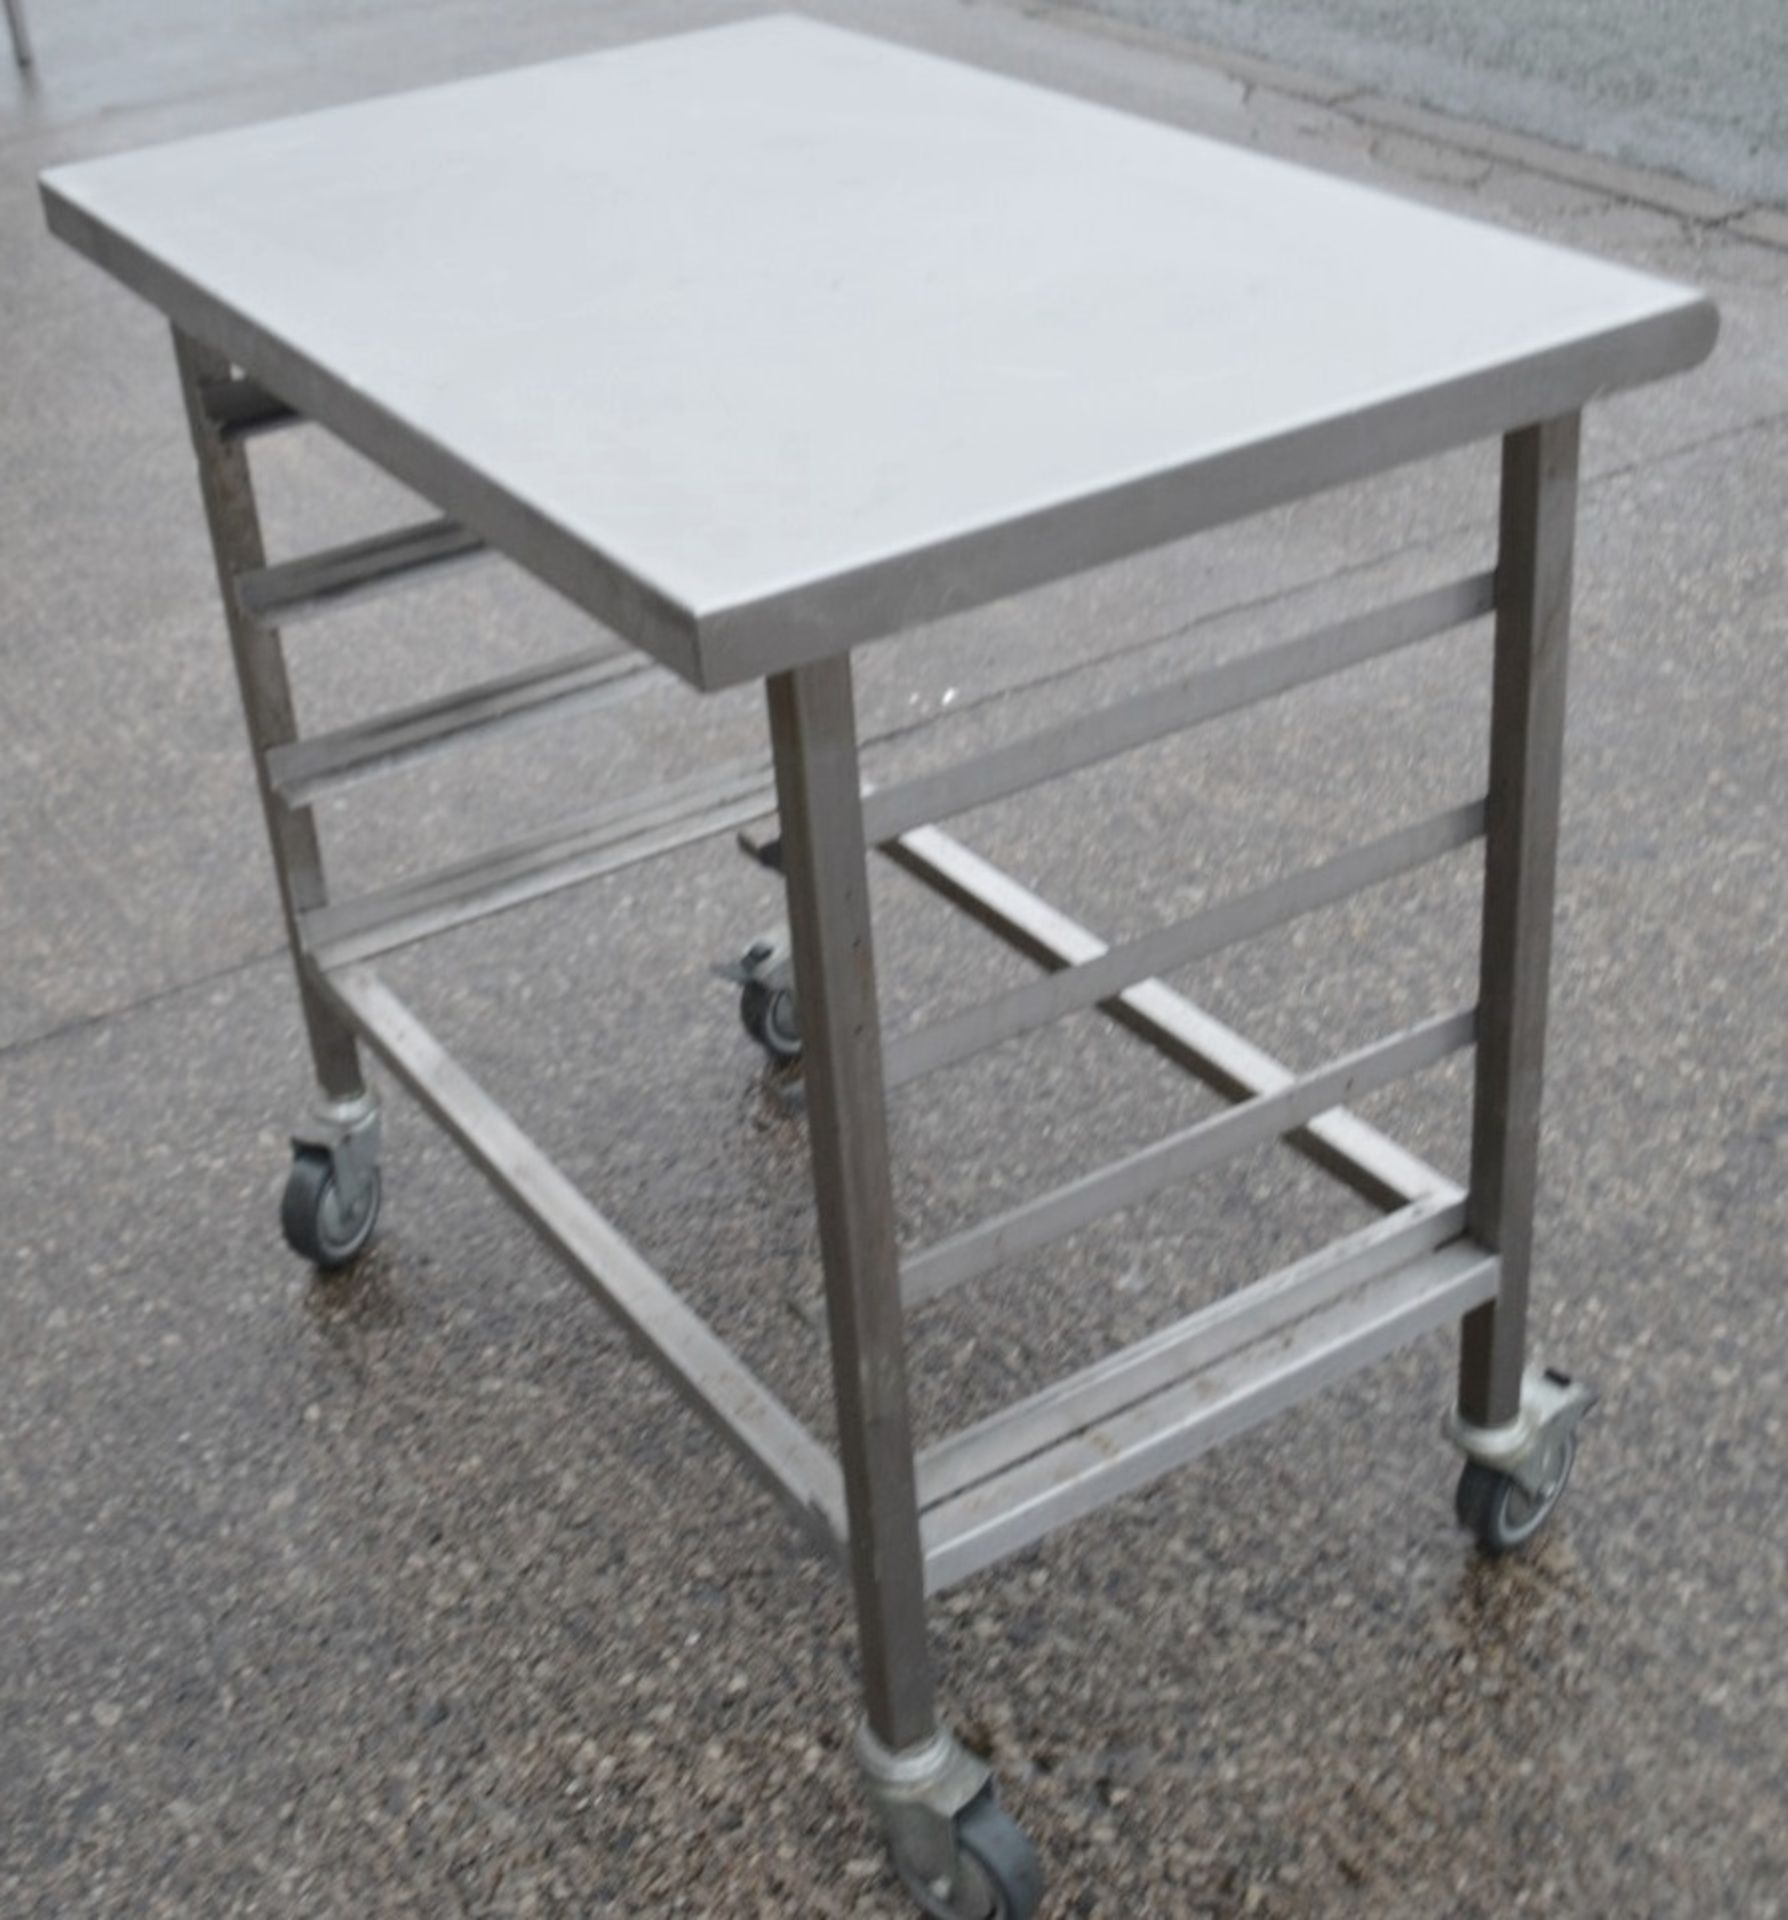 1 x Stainless Steel Commercial Prep Tray Rack - Dimensions: H88 x W91 x D60cm - Very Recently - Image 4 of 4